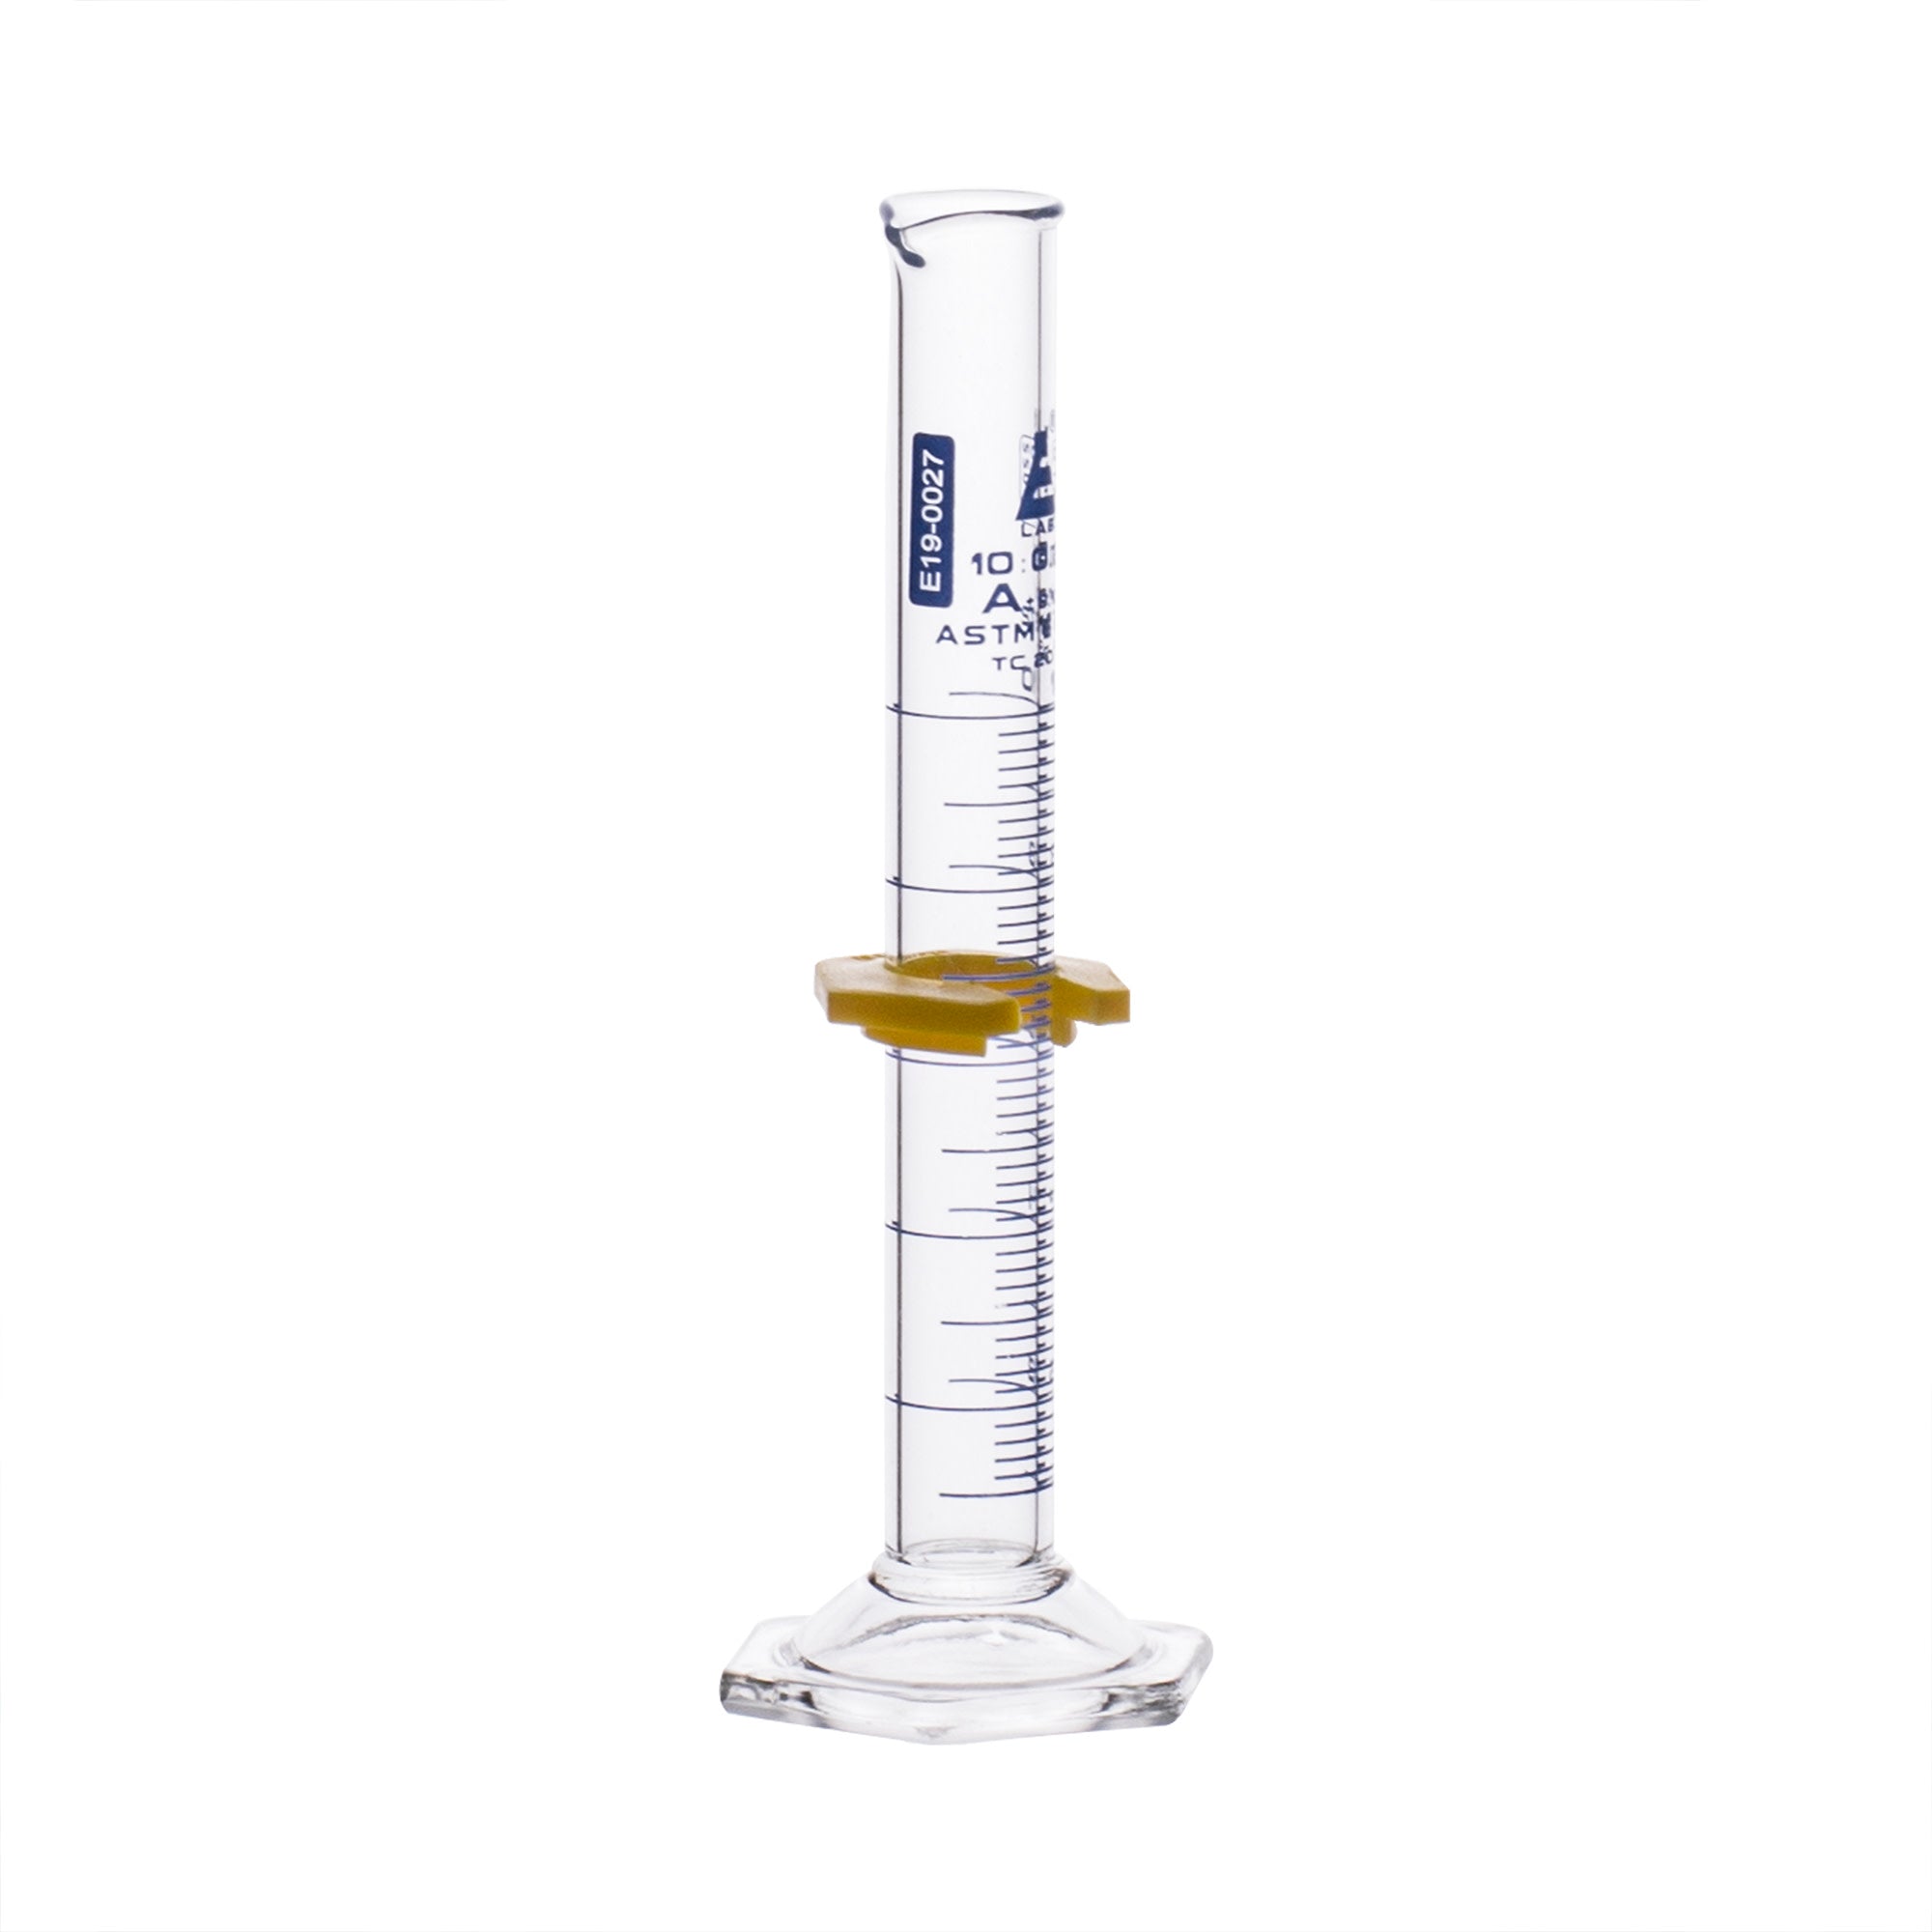 Borosilicate Glass ASTM Graduated Cylinder with Hexagonal Base and Guard, 10 ml, Class A with USP & Individual Work Certificate, Autoclavable